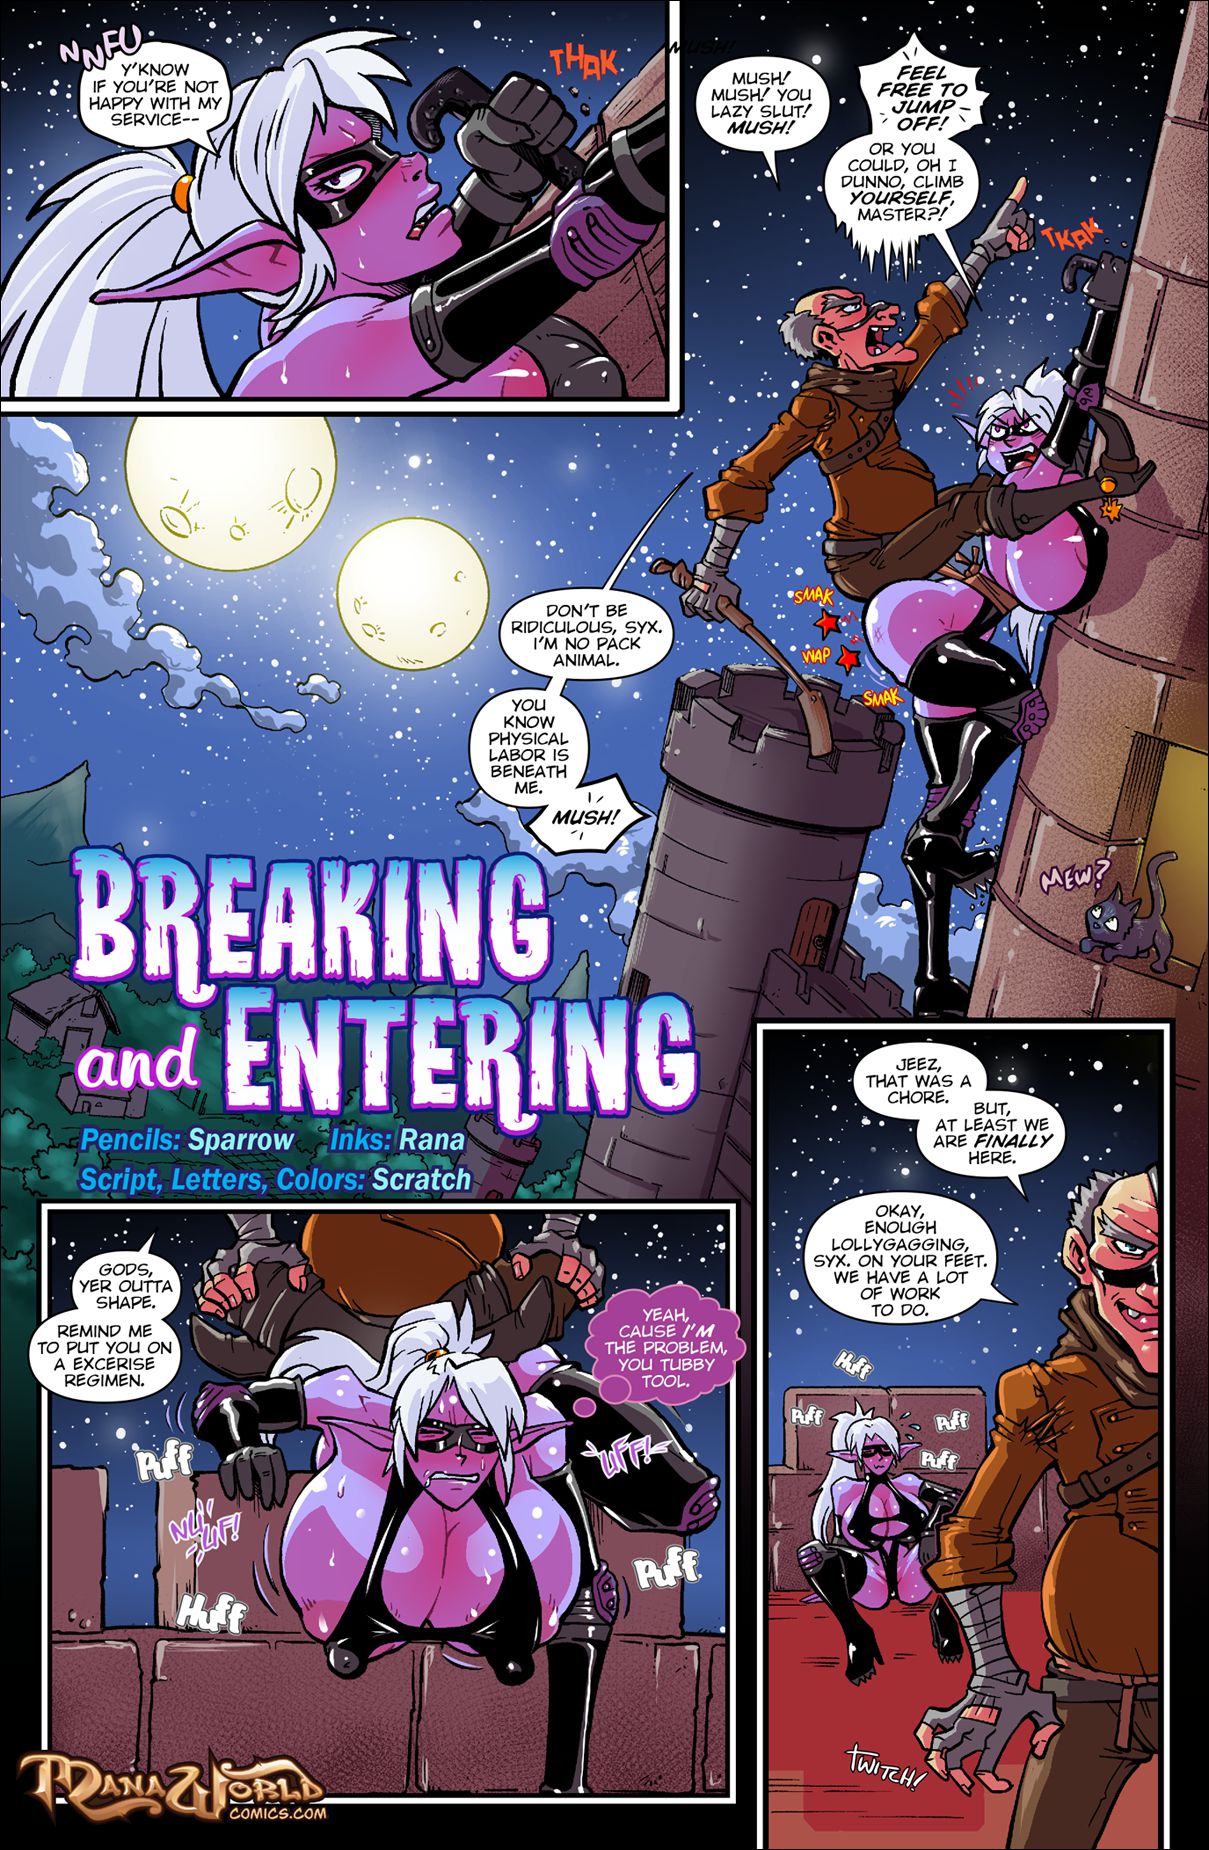 Breaking and entering furry porn comic